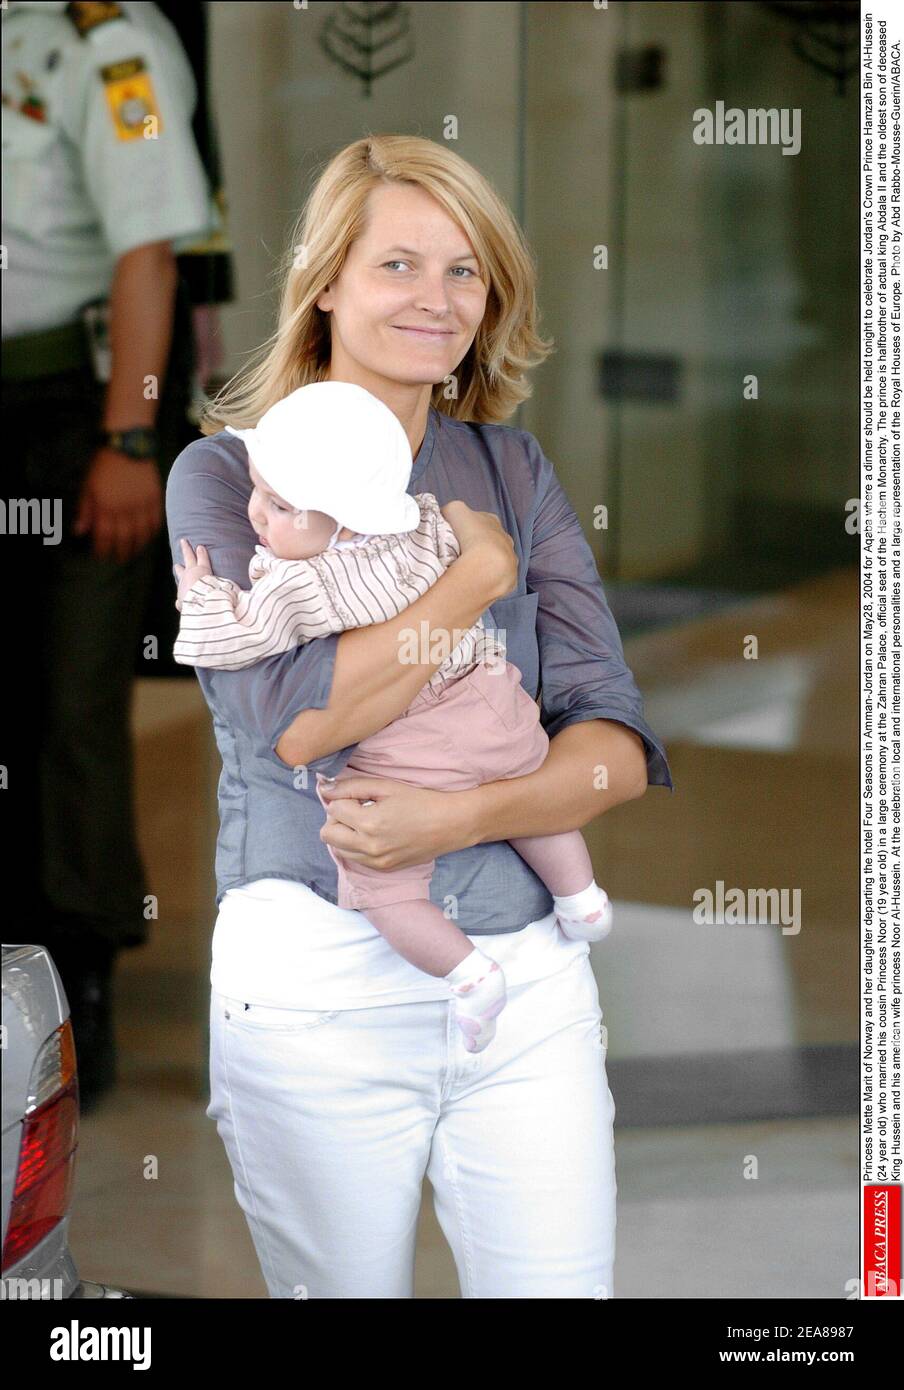 Princess Mette-Marit of Norway and her daughter departing the hotel Four Seasons in Amman-Jordan on May28, 2004 for Aqaba where a dinner should be held tonight to celebrate Jordan's Crown Prince Hamzah Bin Al-Hussein (24 year old) who married his cousin Princess Noor (19 year old) in a large ceremony at the Zahran Palace, official seat of the Hachem Monarchy. The prince is halfbrother of actual king Abdala II and the oldest son of deceased King Hussein and his american wife princess Noor Al-Hussein. At the celebration local and international personalities and a large representation of the Roya Stock Photo